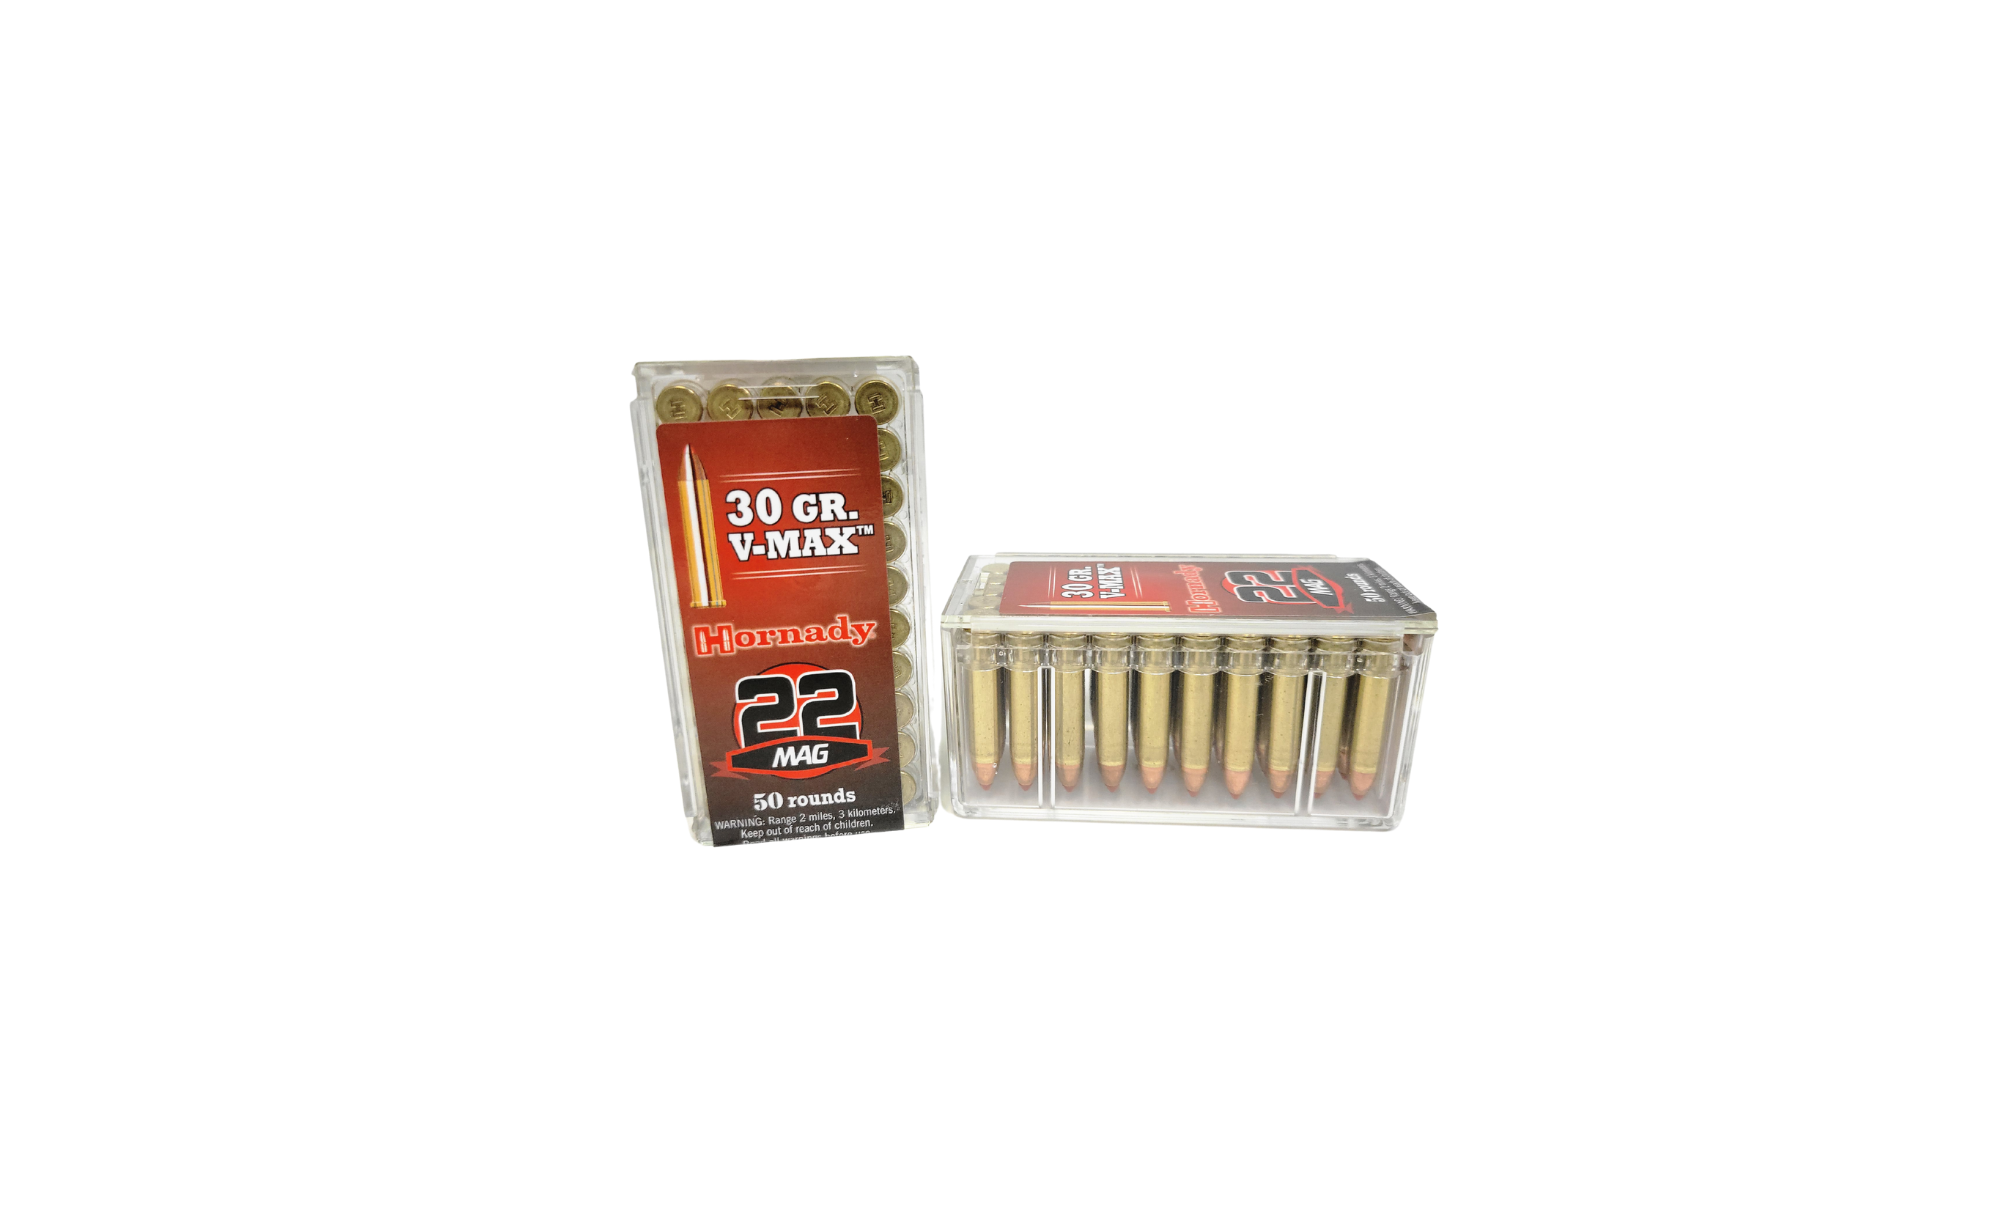 FEDERAL .22 WMR Rimfire Small Game 50 Grain JHP – 50 Rounds (Box) [NO TAX outside Texas] Product Image